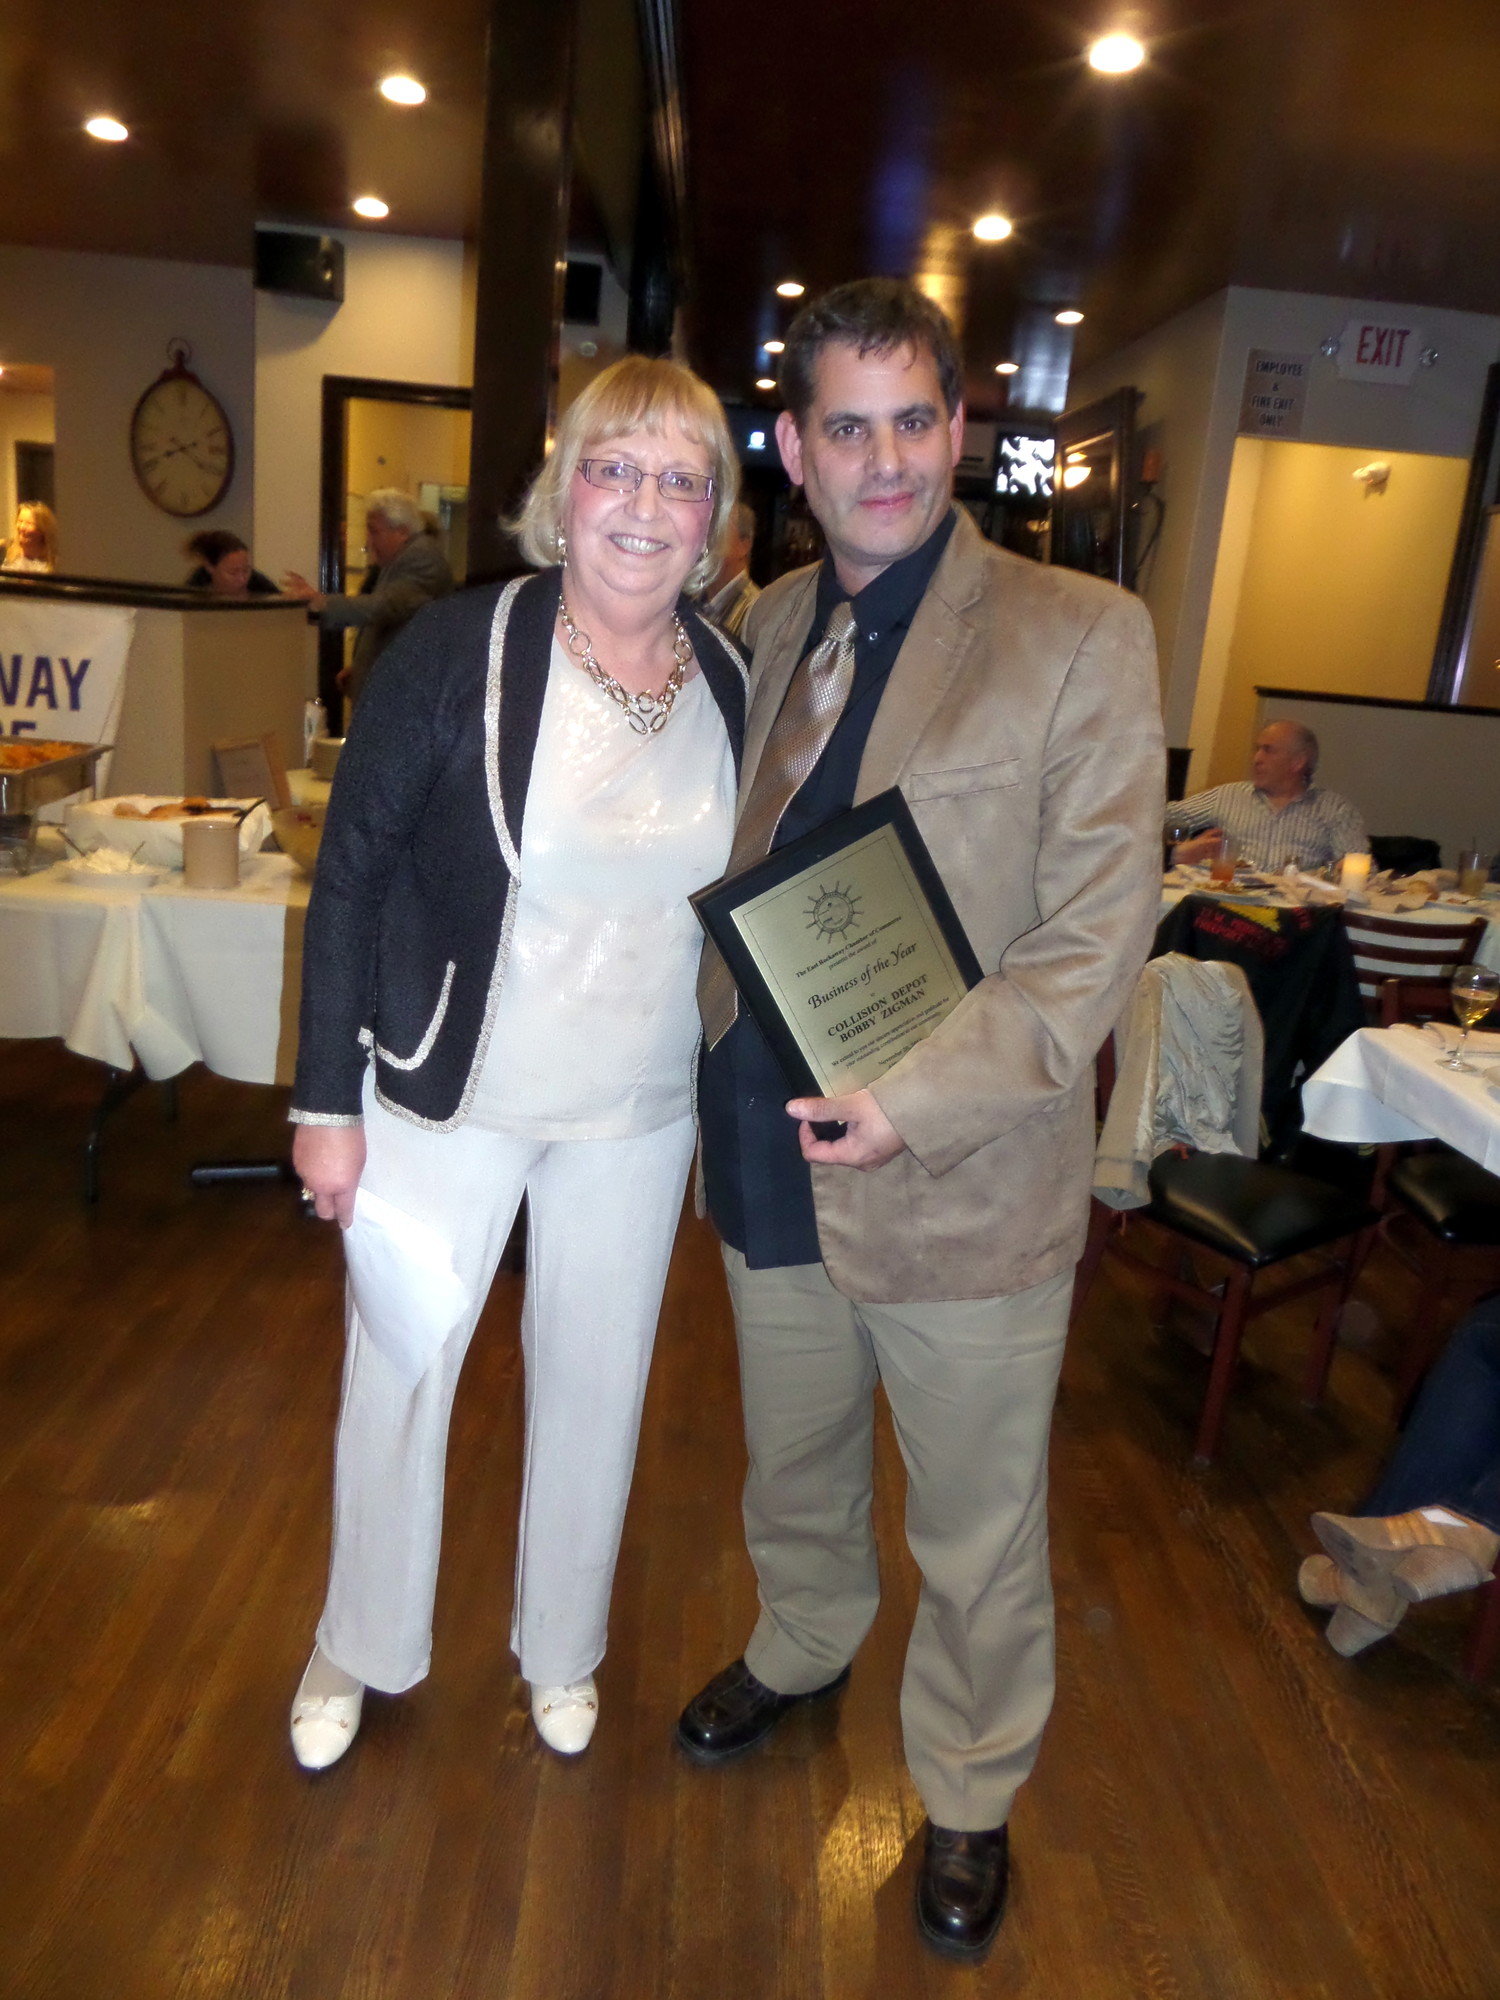 Chamber president Debbie Hirschberg presented Collision Depot owner Bobby Zigman with his plaque at the event, held at Althouse1848 restaurant, on Nov. 20.